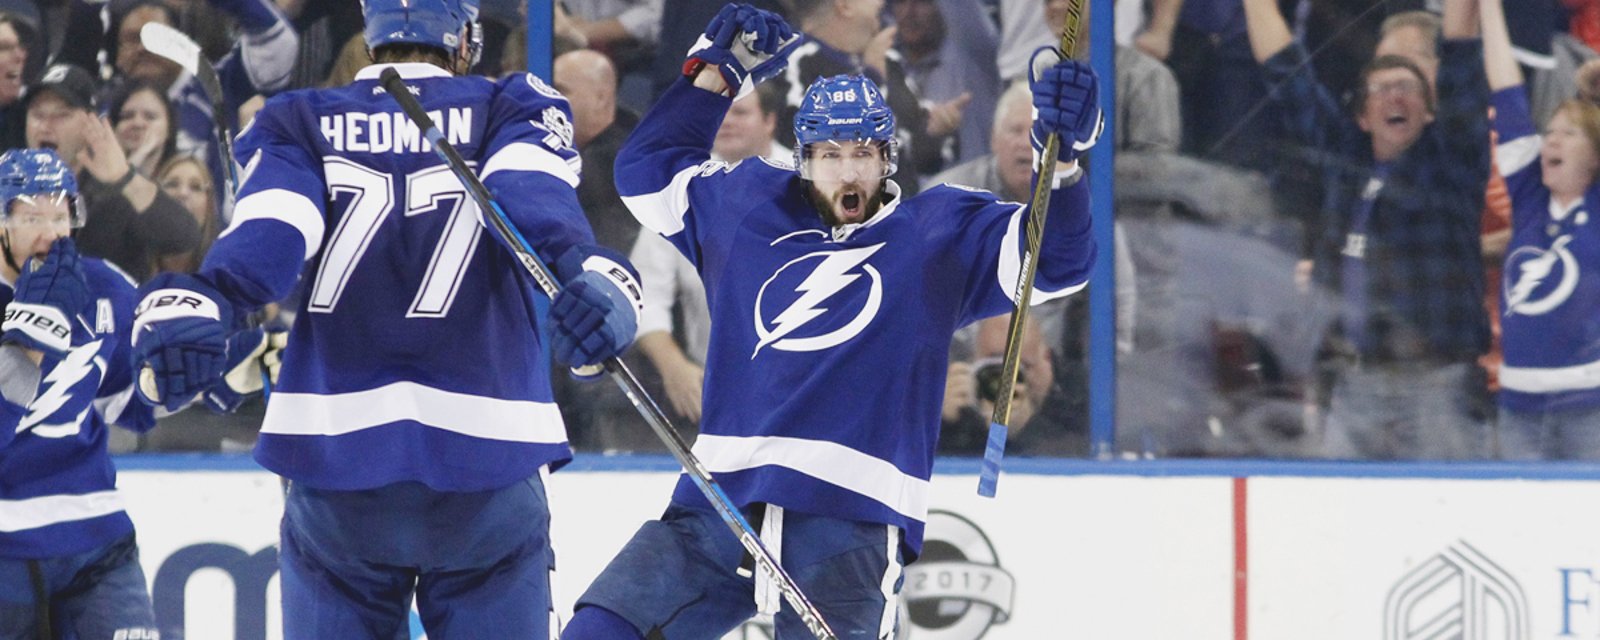 Must see: Kucherov records hat trick in 2nd